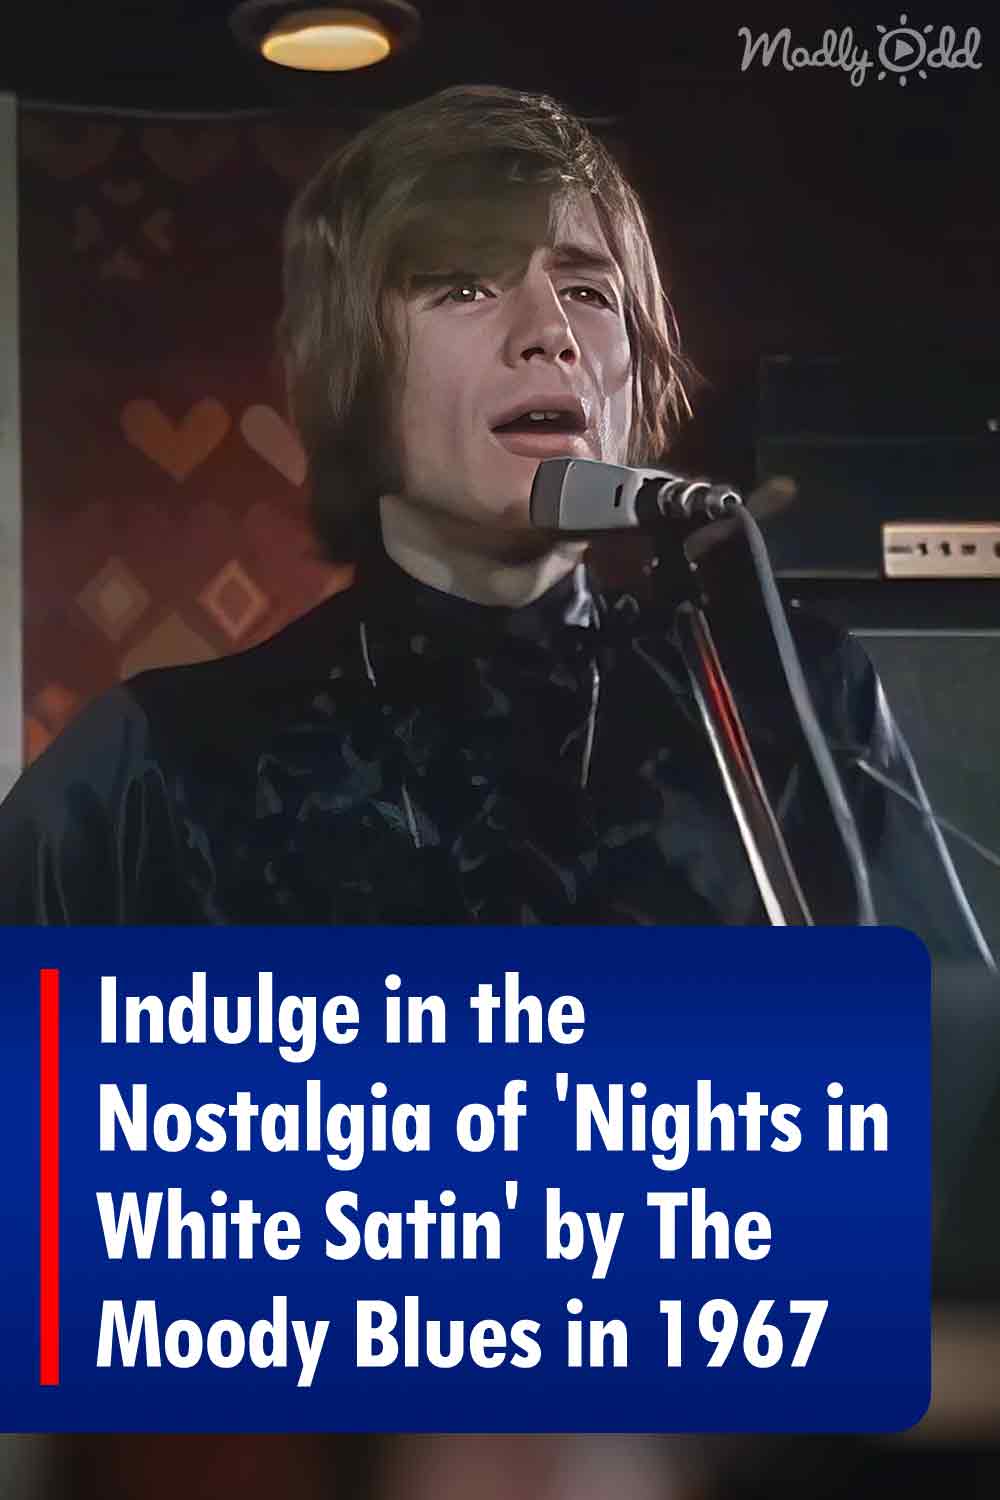 Indulge in the Nostalgia of \'Nights in White Satin\' by The Moody Blues in 1967